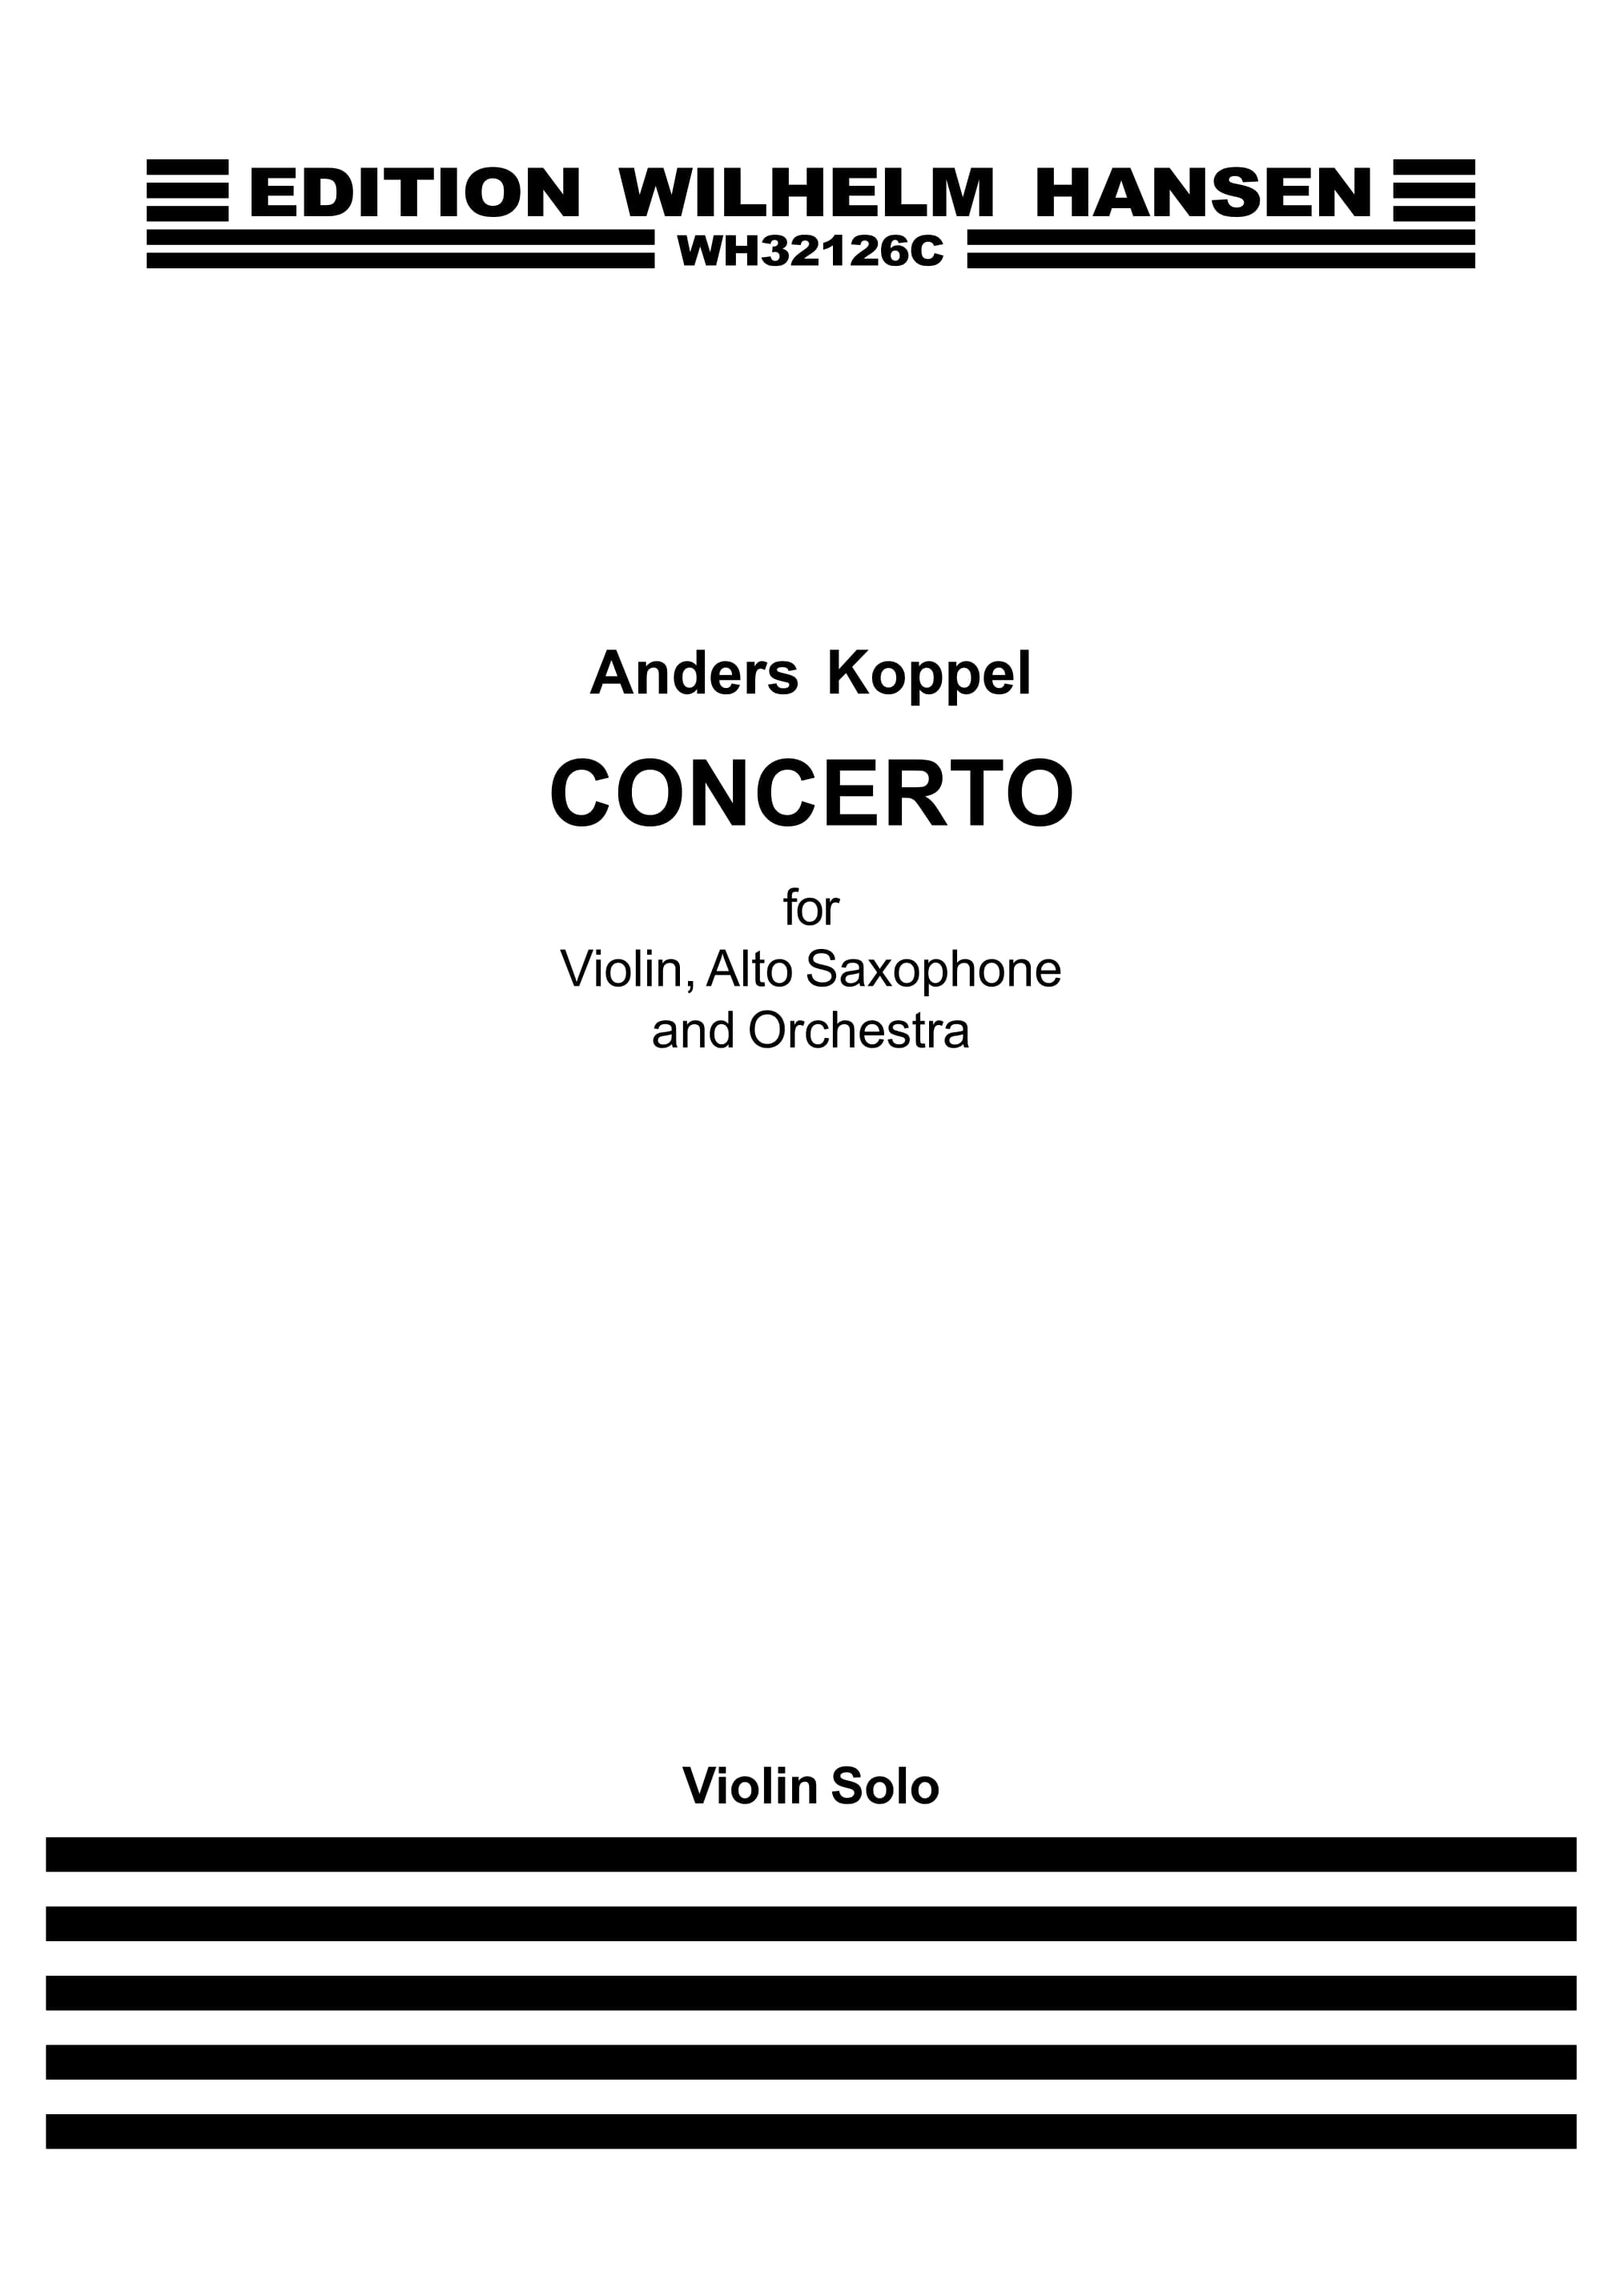 Anders Koppel: Concerto For Violin  Saxophone and Orchestra: Orchestra: Part